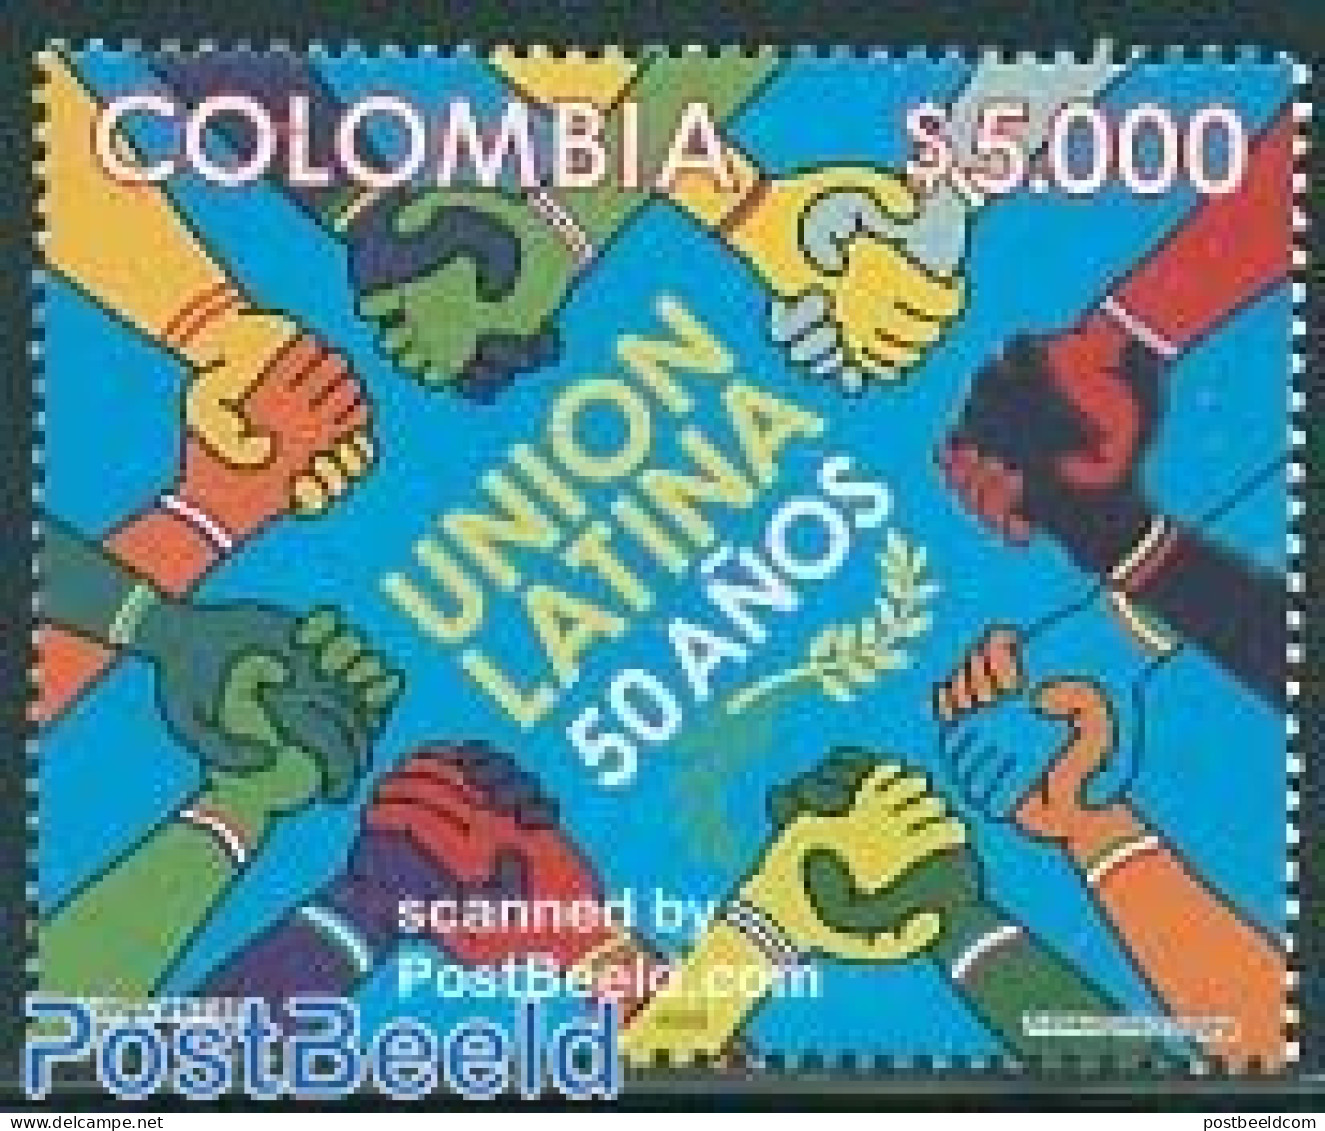 Colombia 2005 Latin Union 1v, Mint NH - Colombia